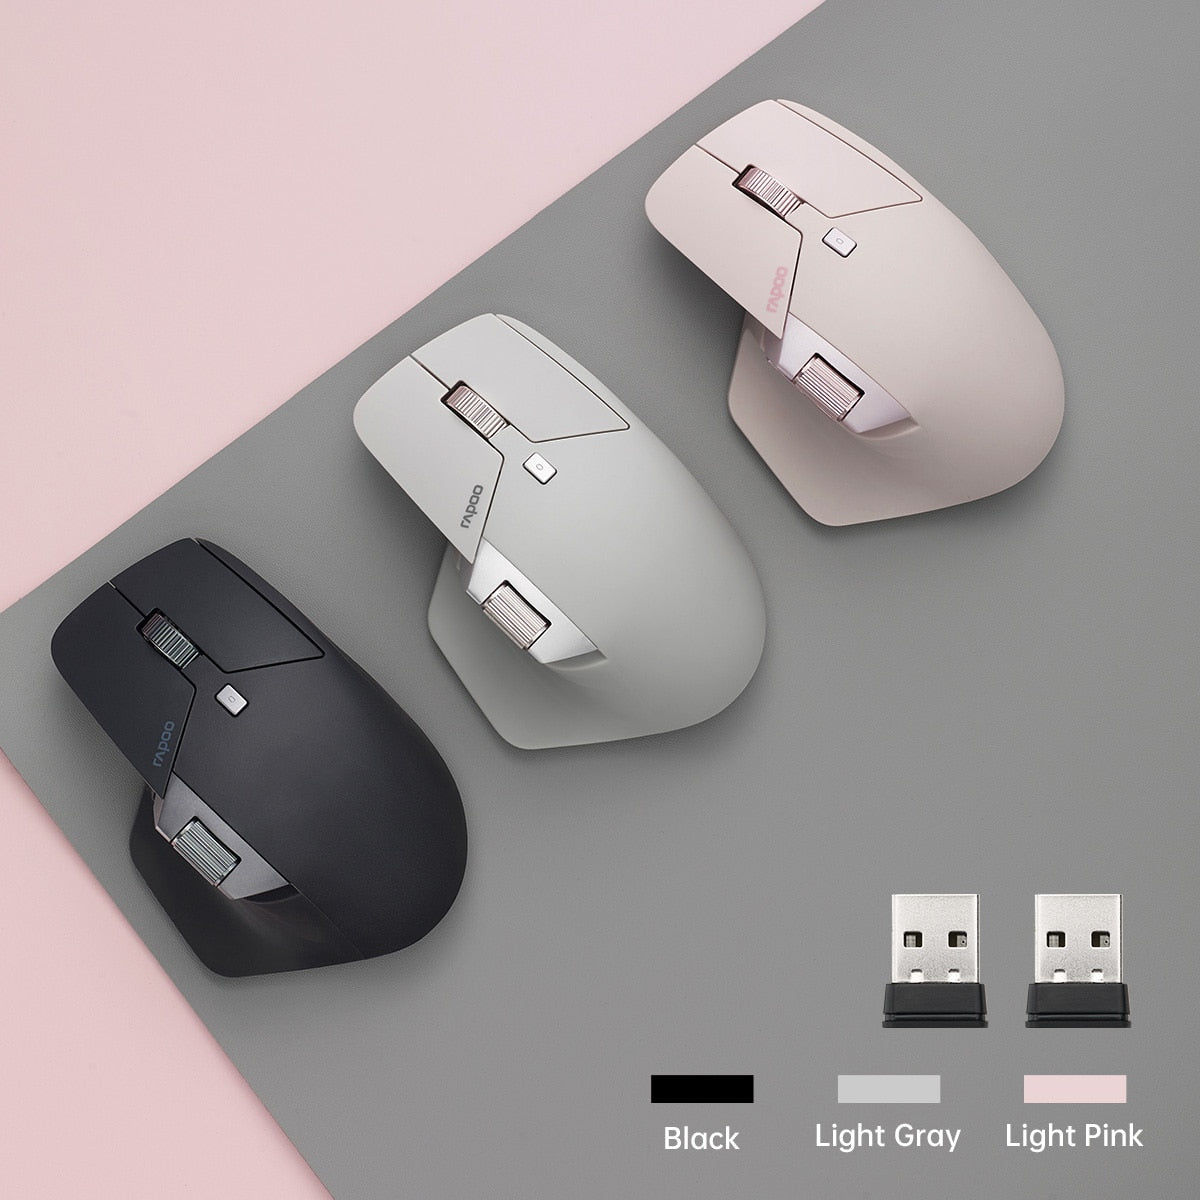 Rapoo MT760L Rechargeable Multi-mode Wireless Mouse Ergonomic 3200 DPI Easy-Switch Up to 4 Devices Bluetooth Mouse Office Mice